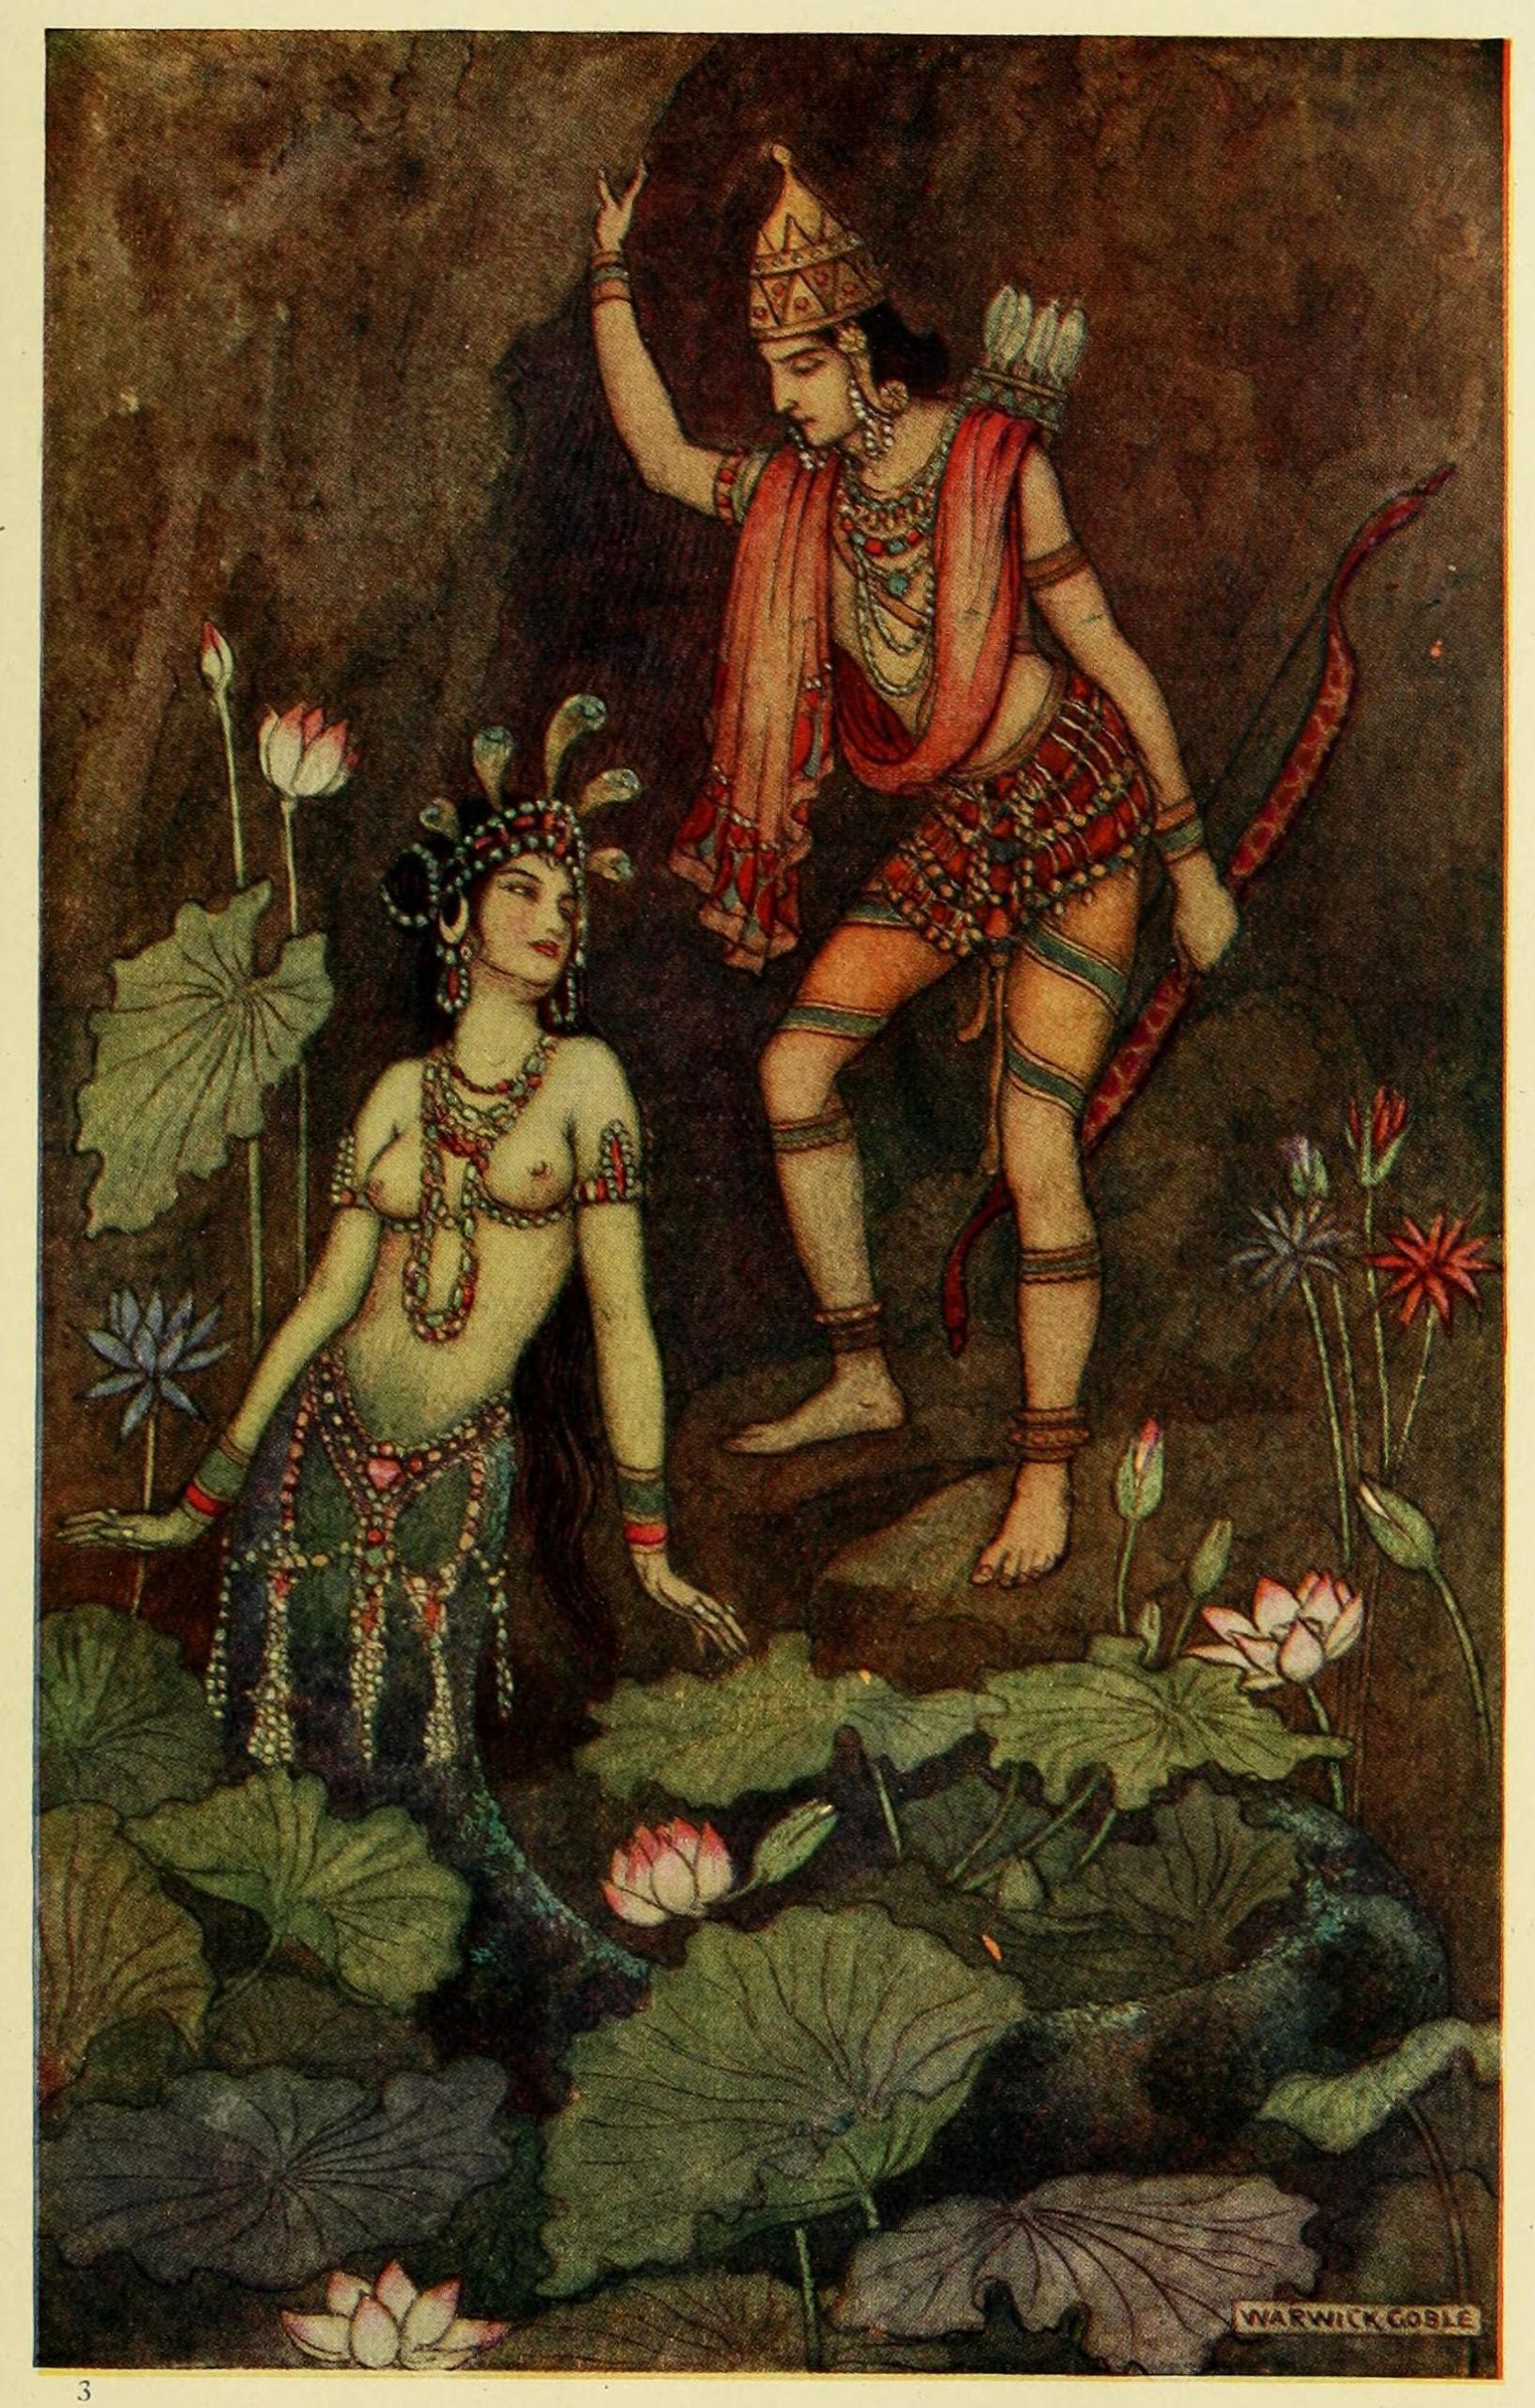 Two figures posing at a rocky crevice surrounded by lush plants and flowers